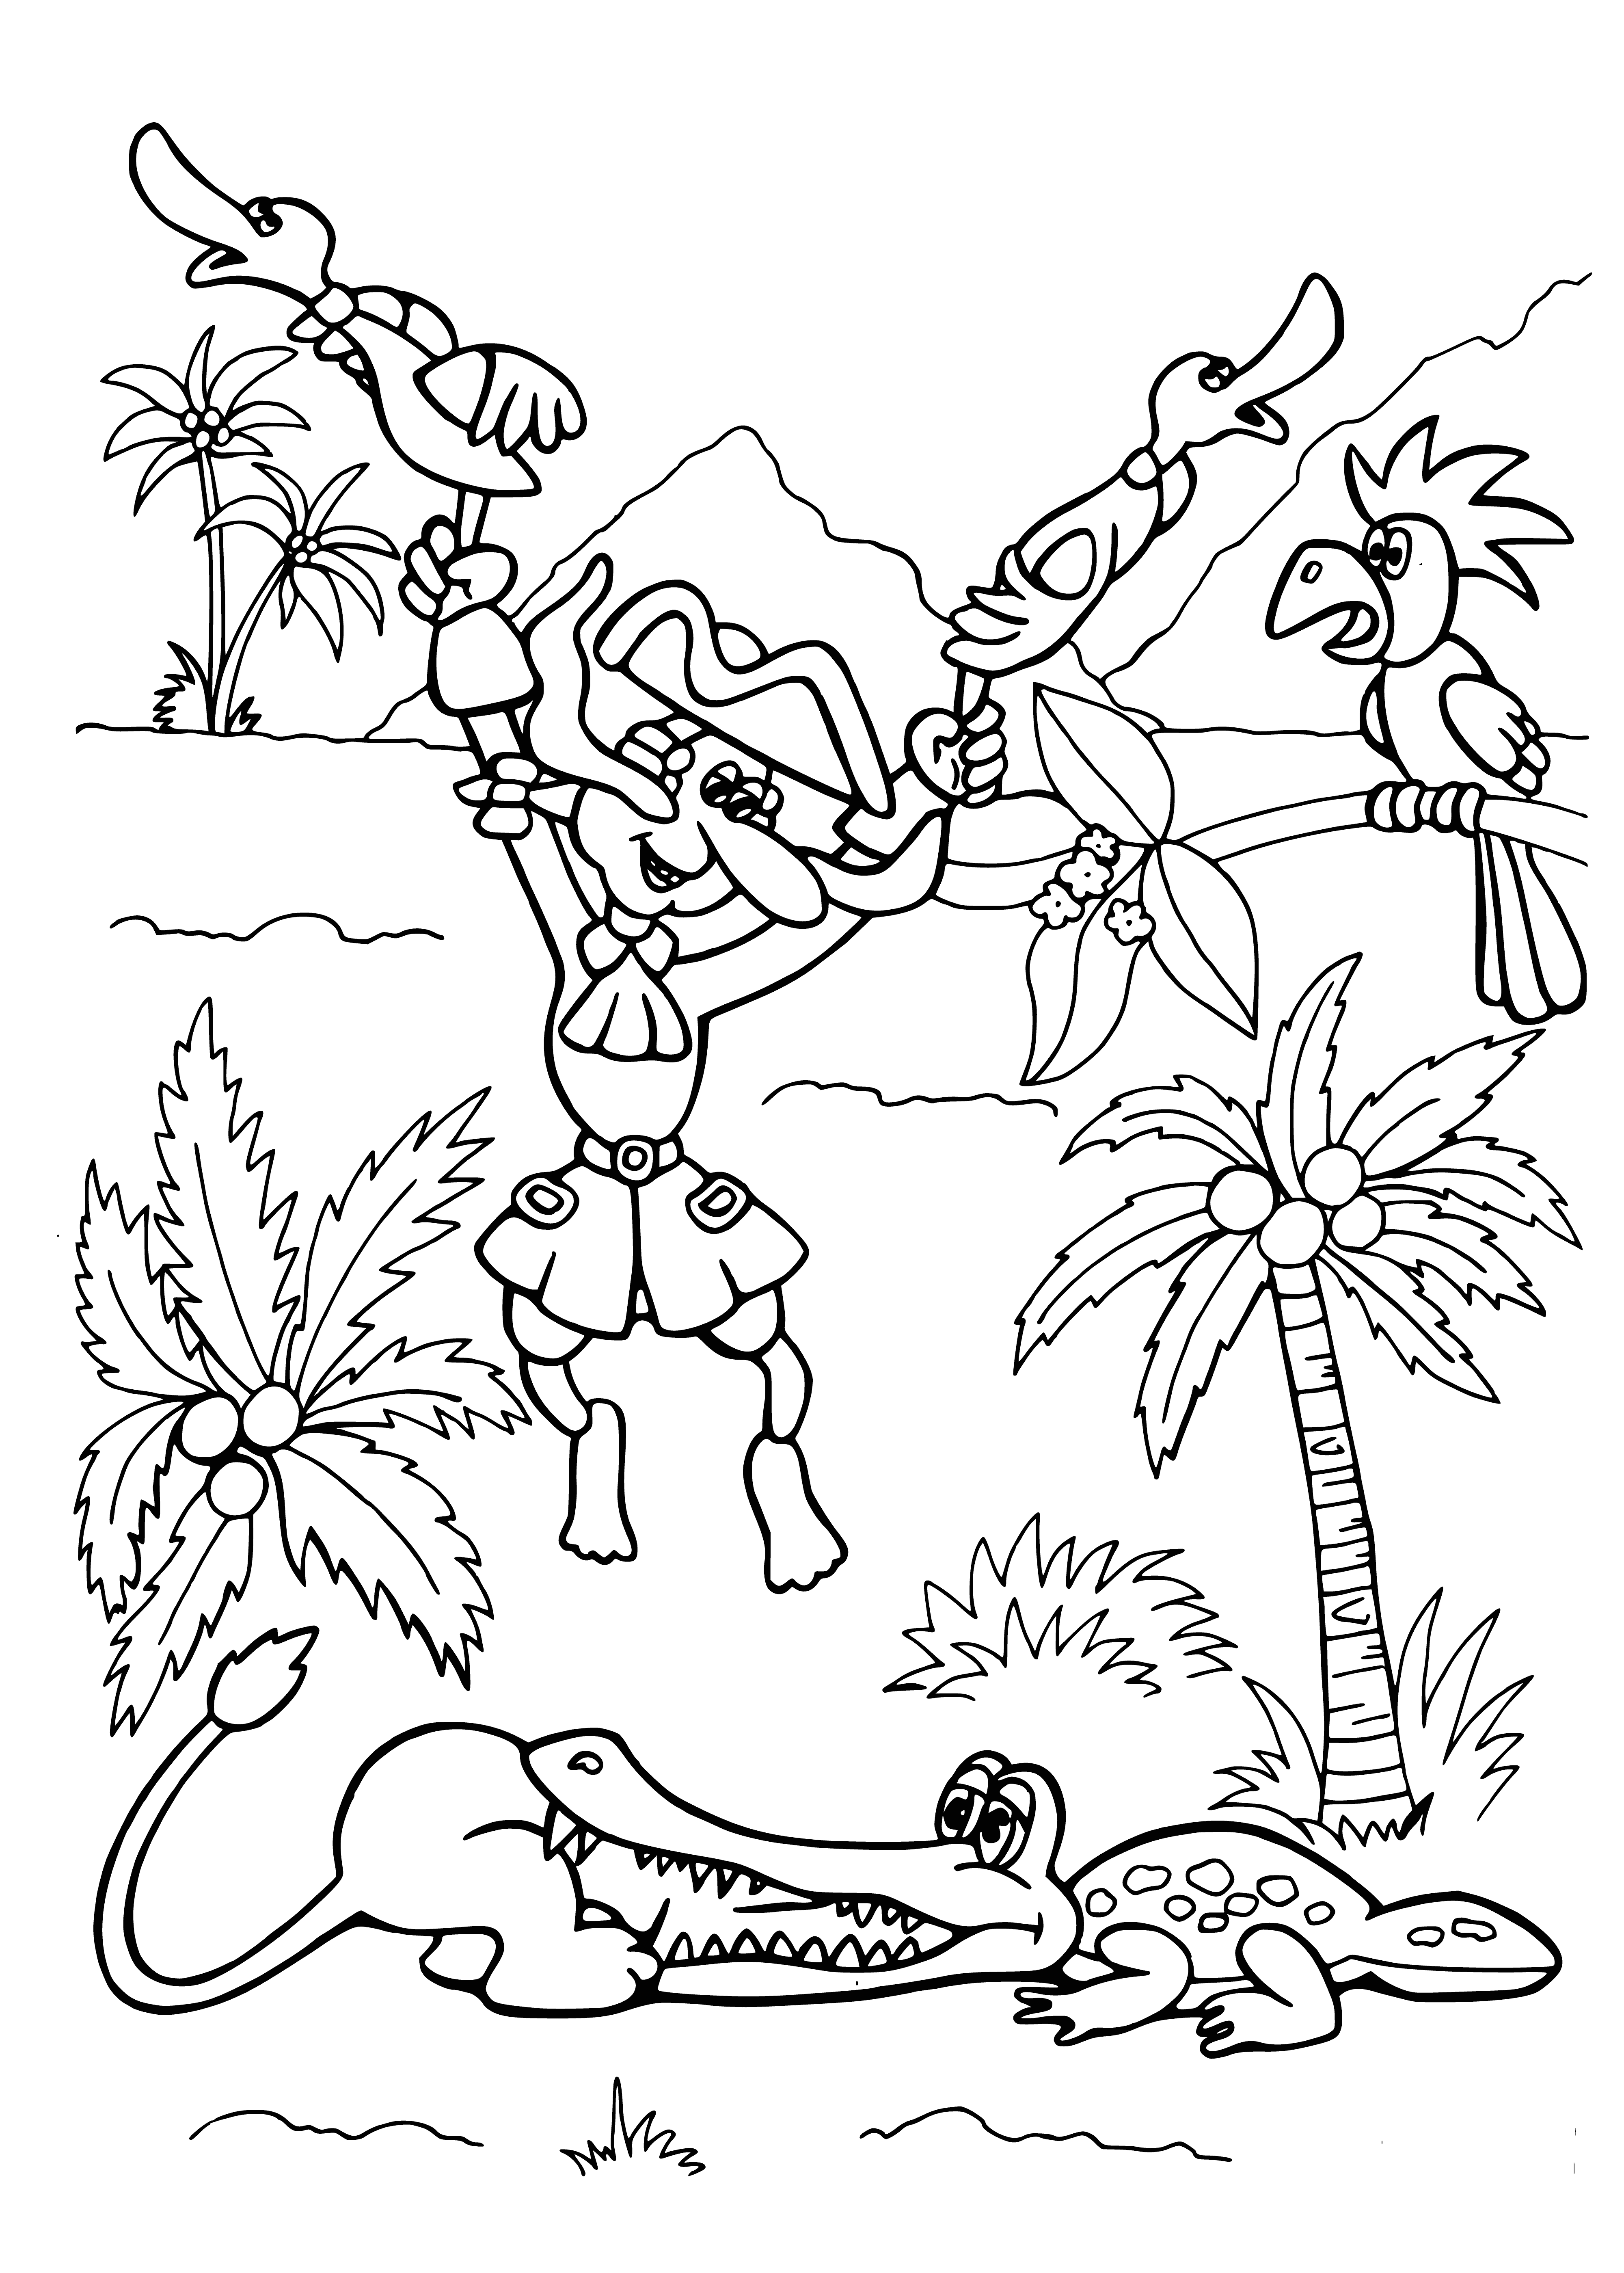 coloring page: Man in blue cape and hat rides lion on crocodile, wielding stick with serious expression.